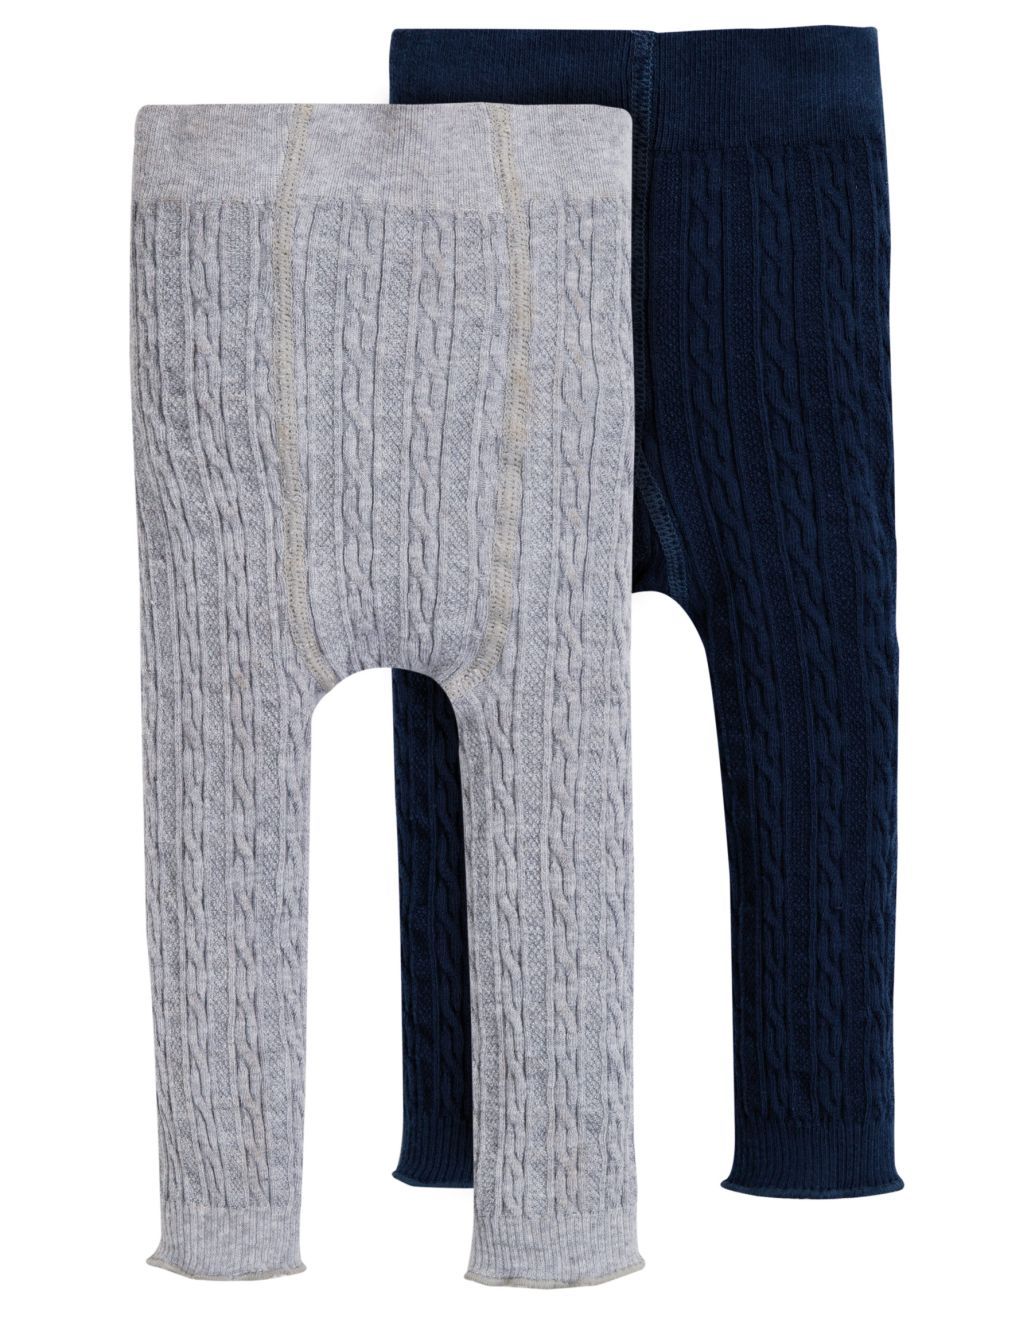 Cosy Cable Leggings - 2-Pack Grey Marl/Space Blue 31-34